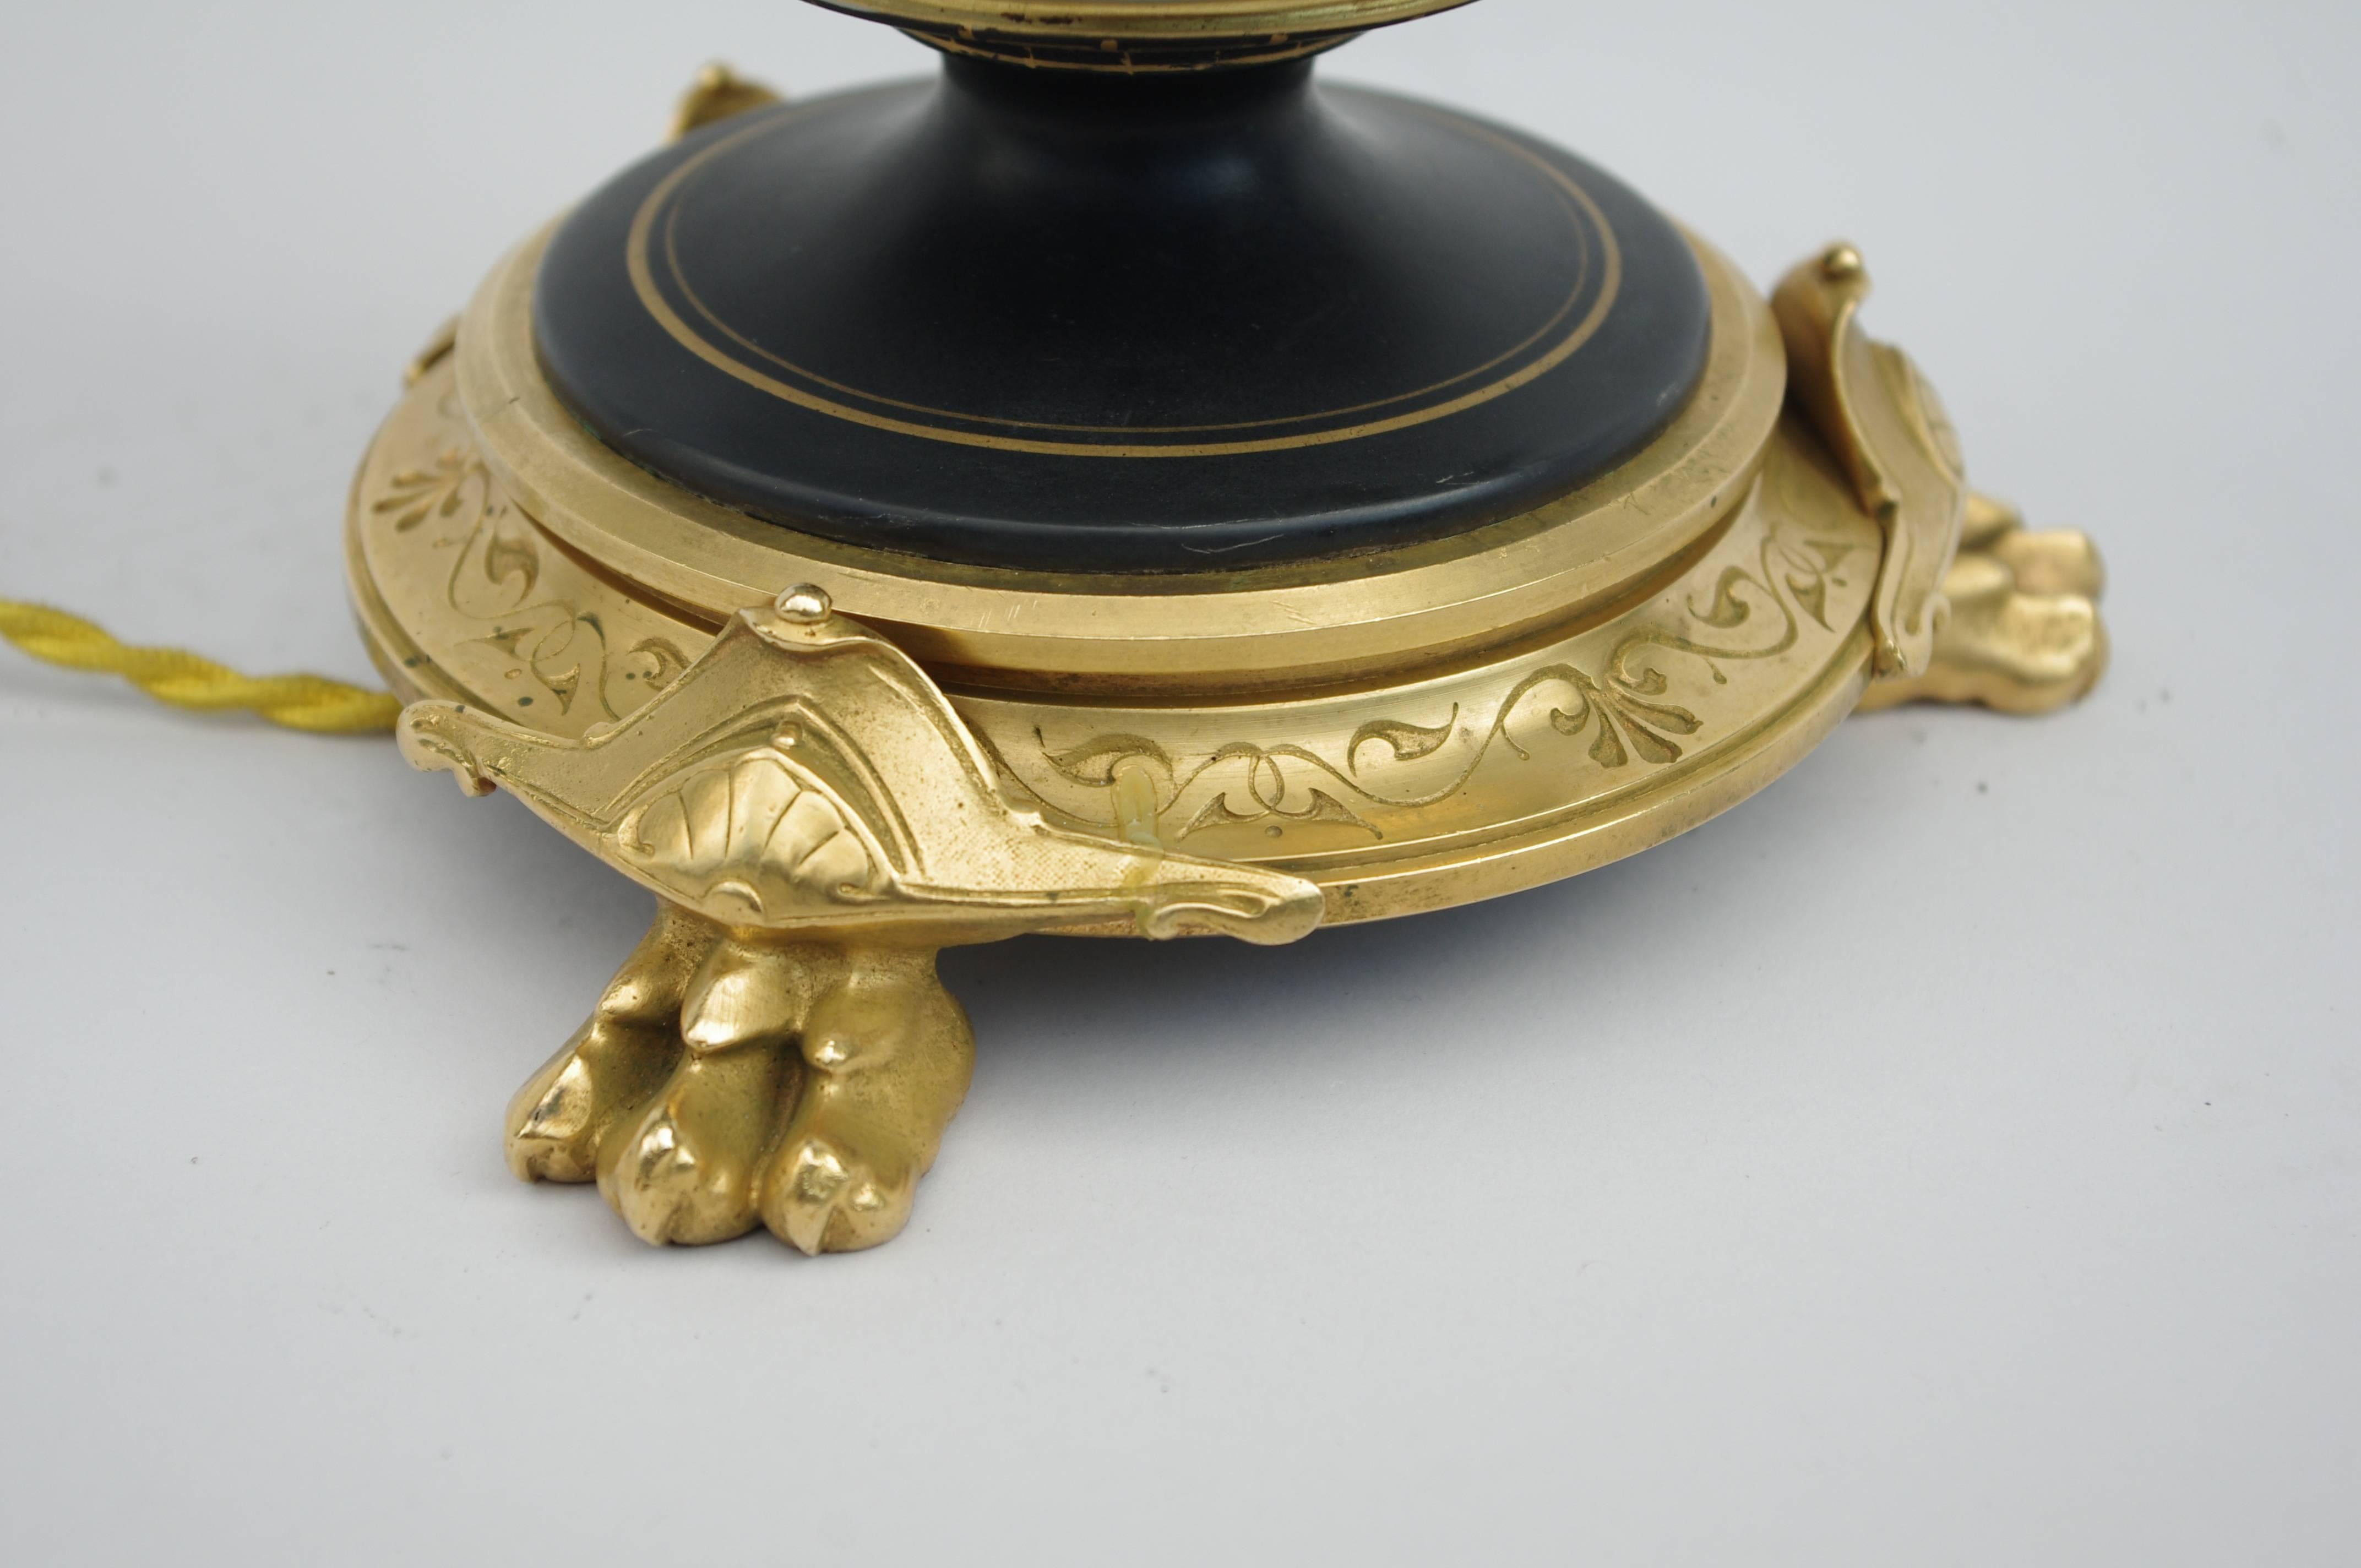 Black matte porcelain.
Neoclassical style.
Mounted in gilt and chiseled bronze.
Antique decor,
circa 1880.